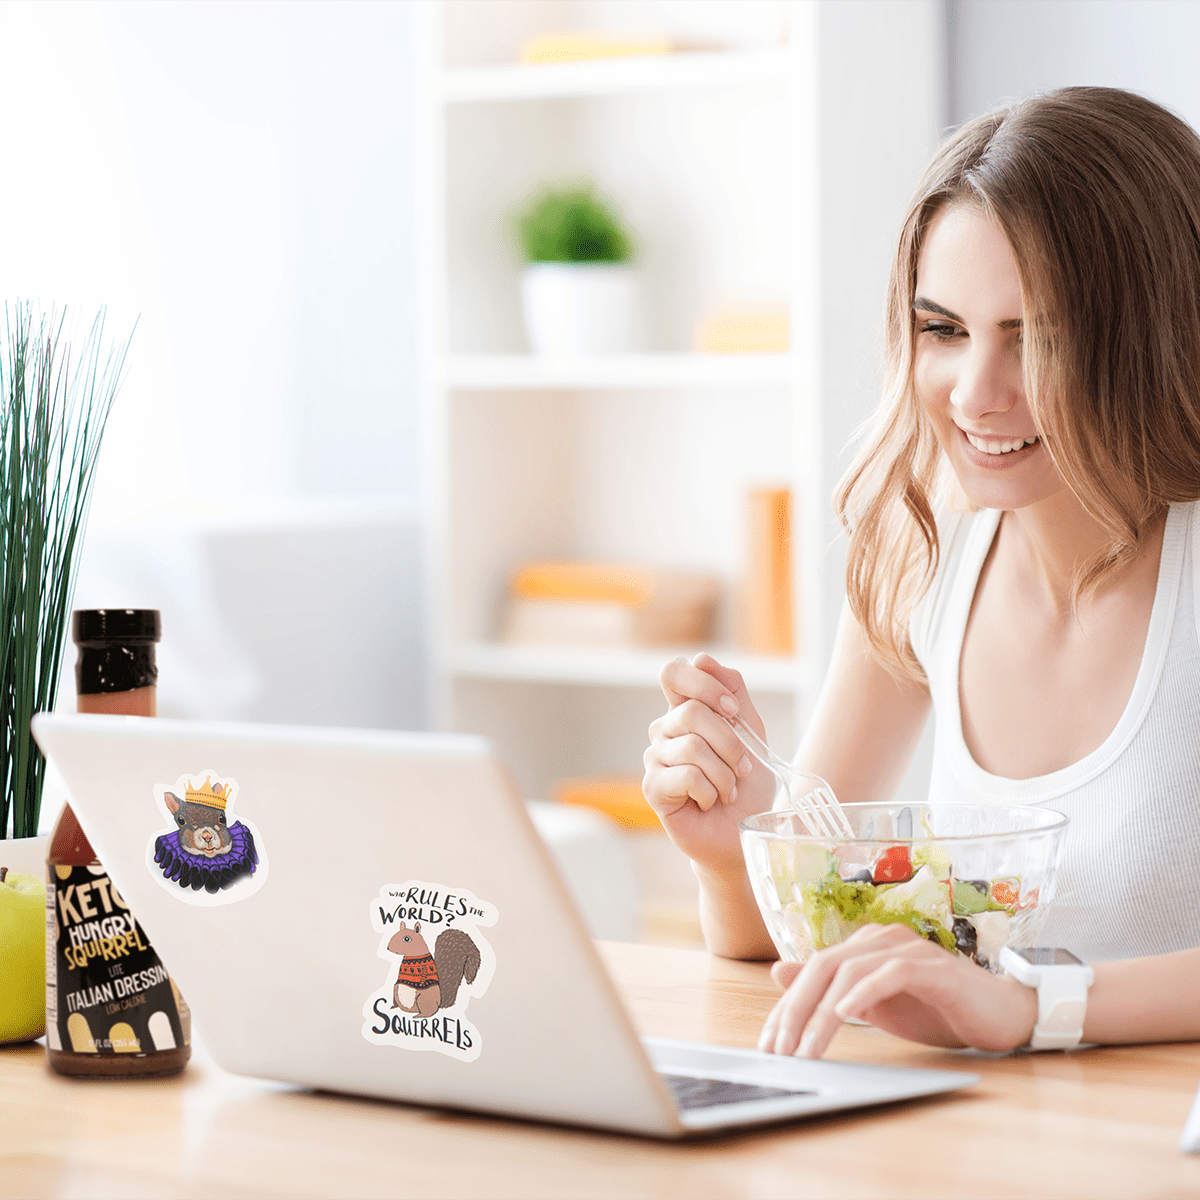 Young Lady enjoying a salad while on the laptop. The latop is decorated with the Hungry Squirrel Stickers